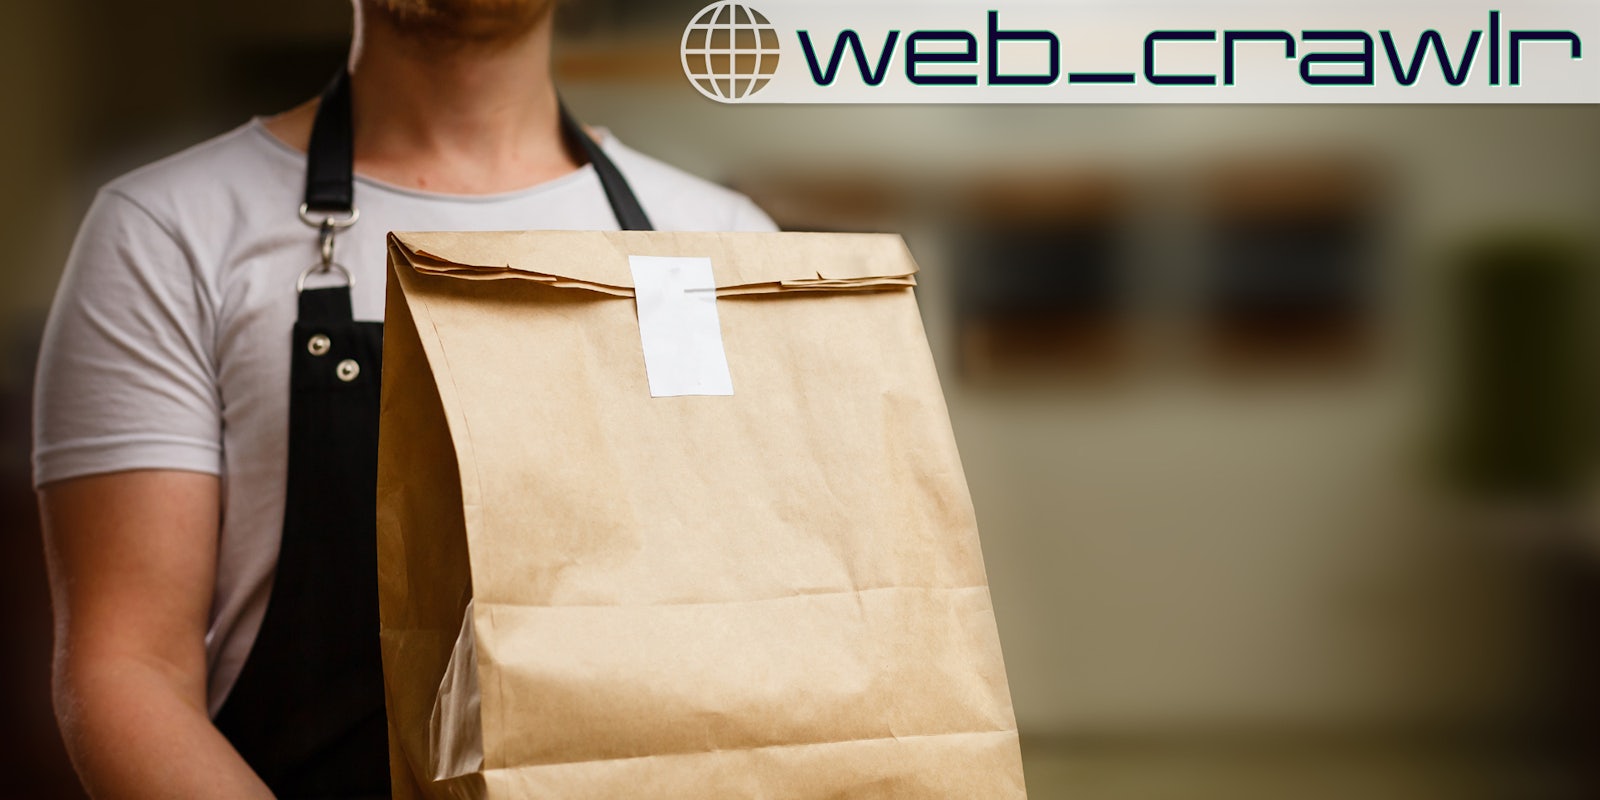 A person holding a brown bag delivery. The Daily Dot newsletter web_crawlr logo is in the top right corner.